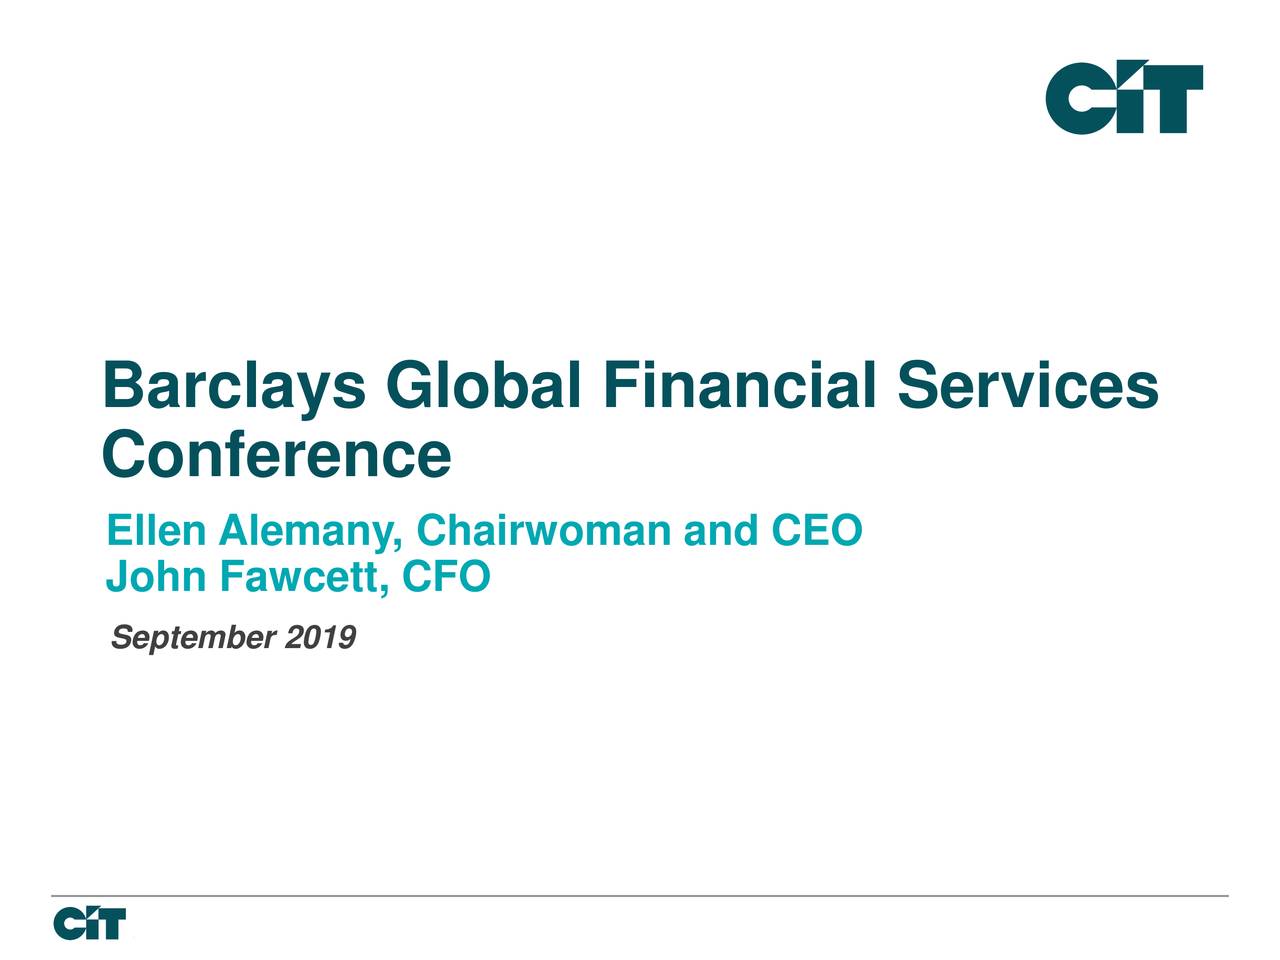 CIT Group (CIT) Presents At Barclays Global Financial Services